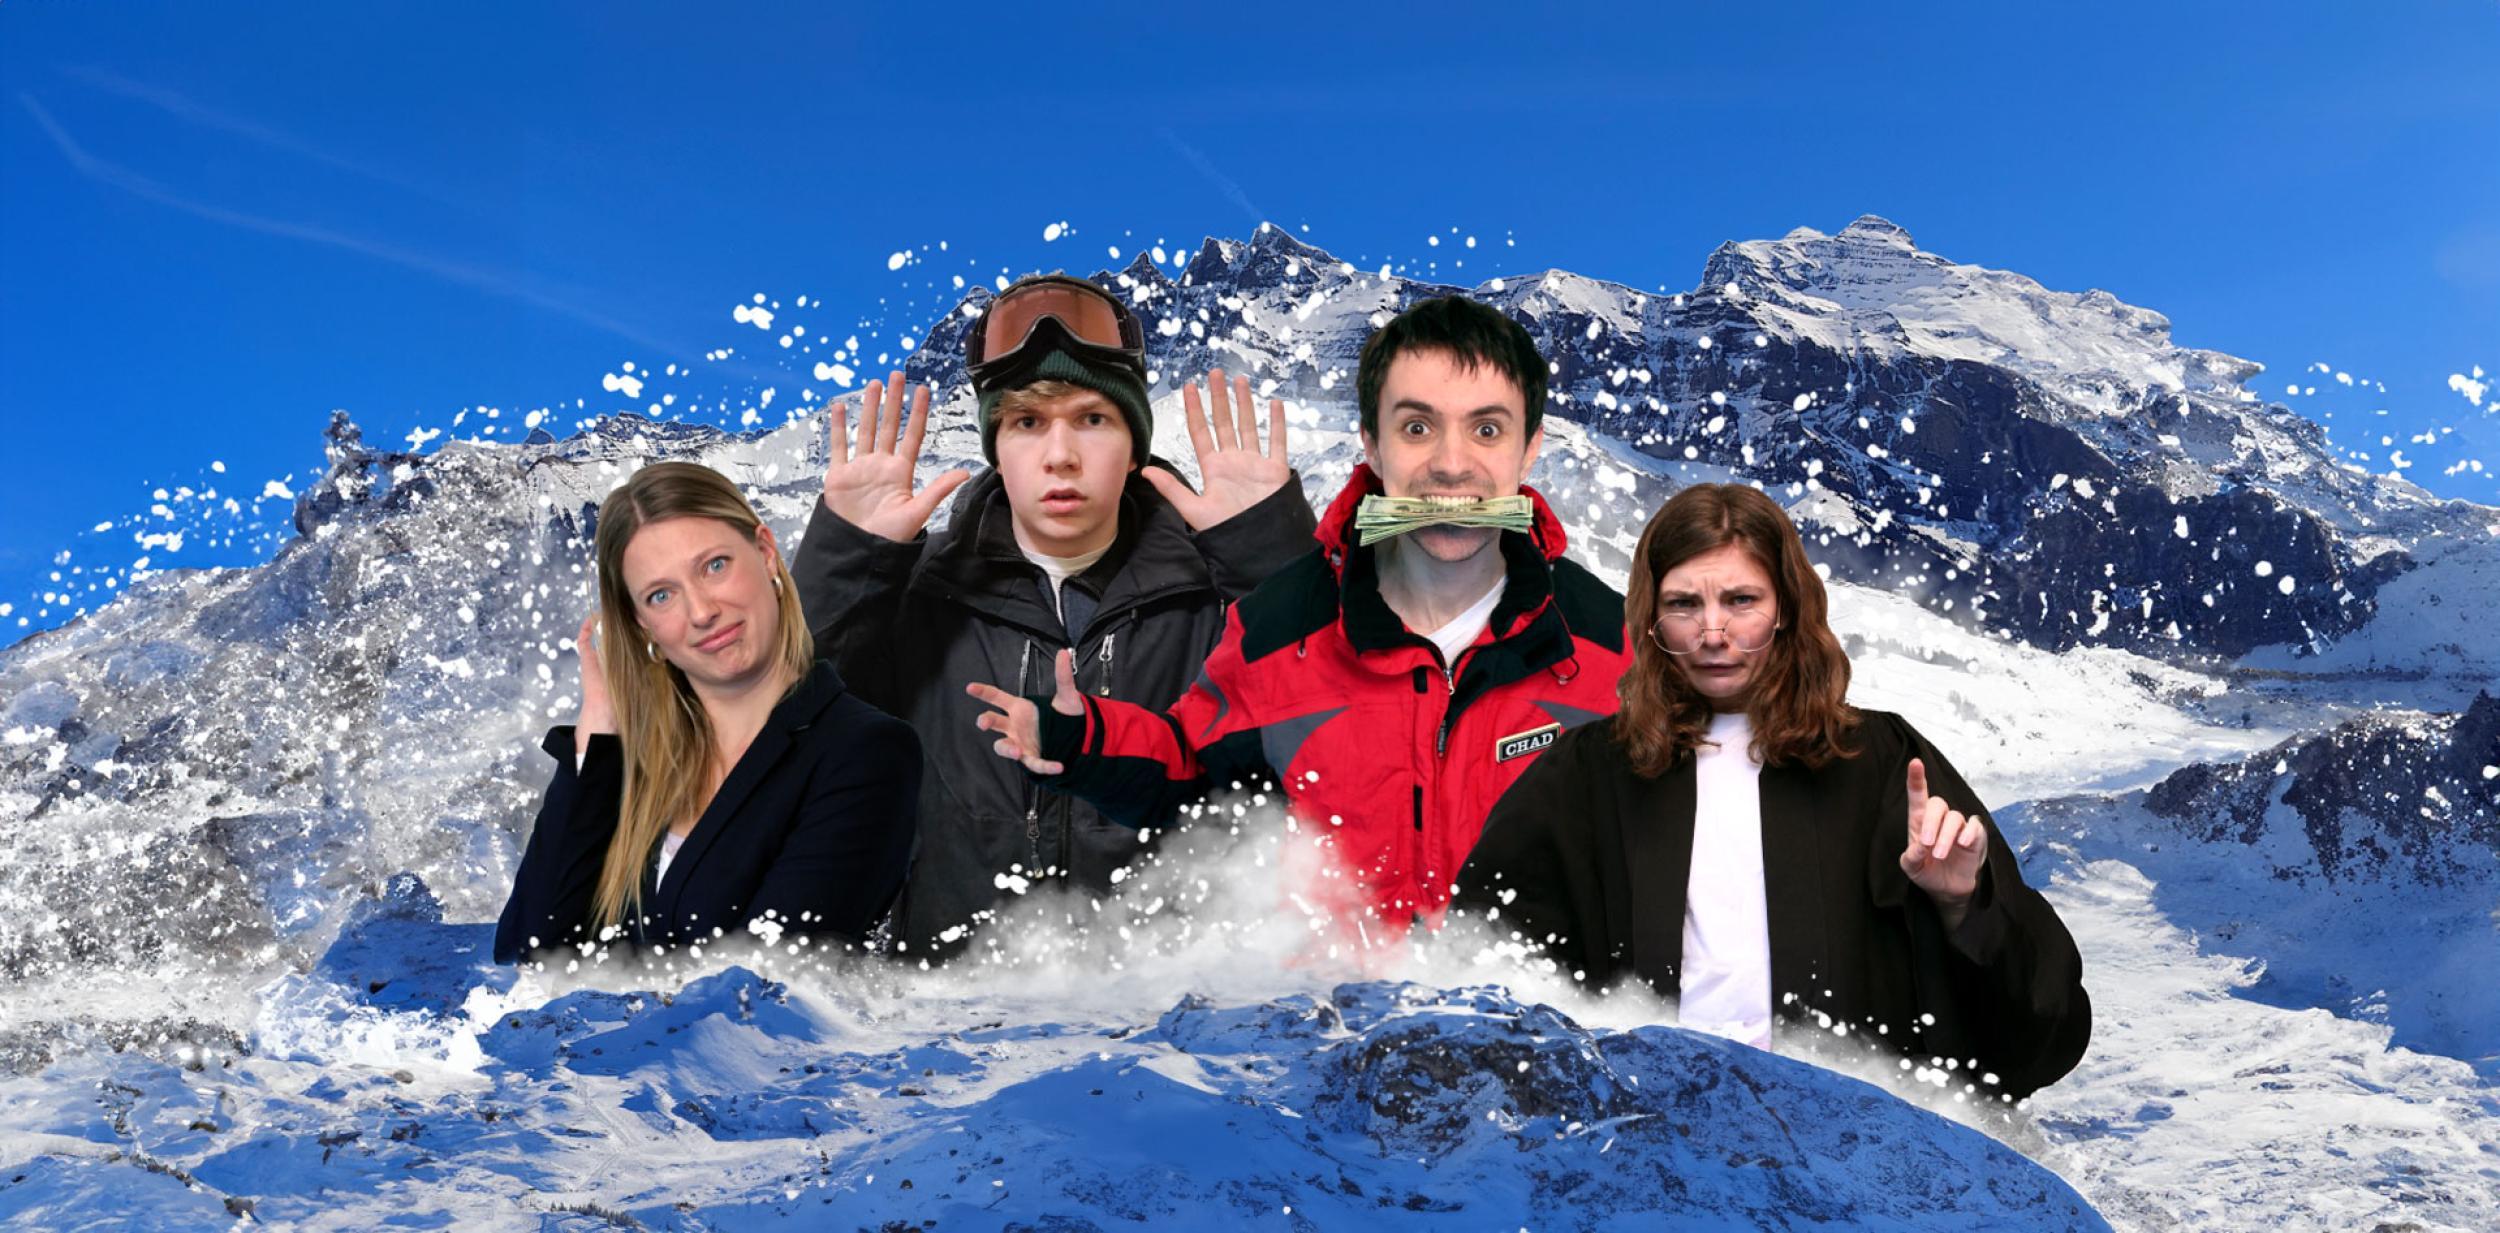 Four young people infront of a snow mountain backdrop